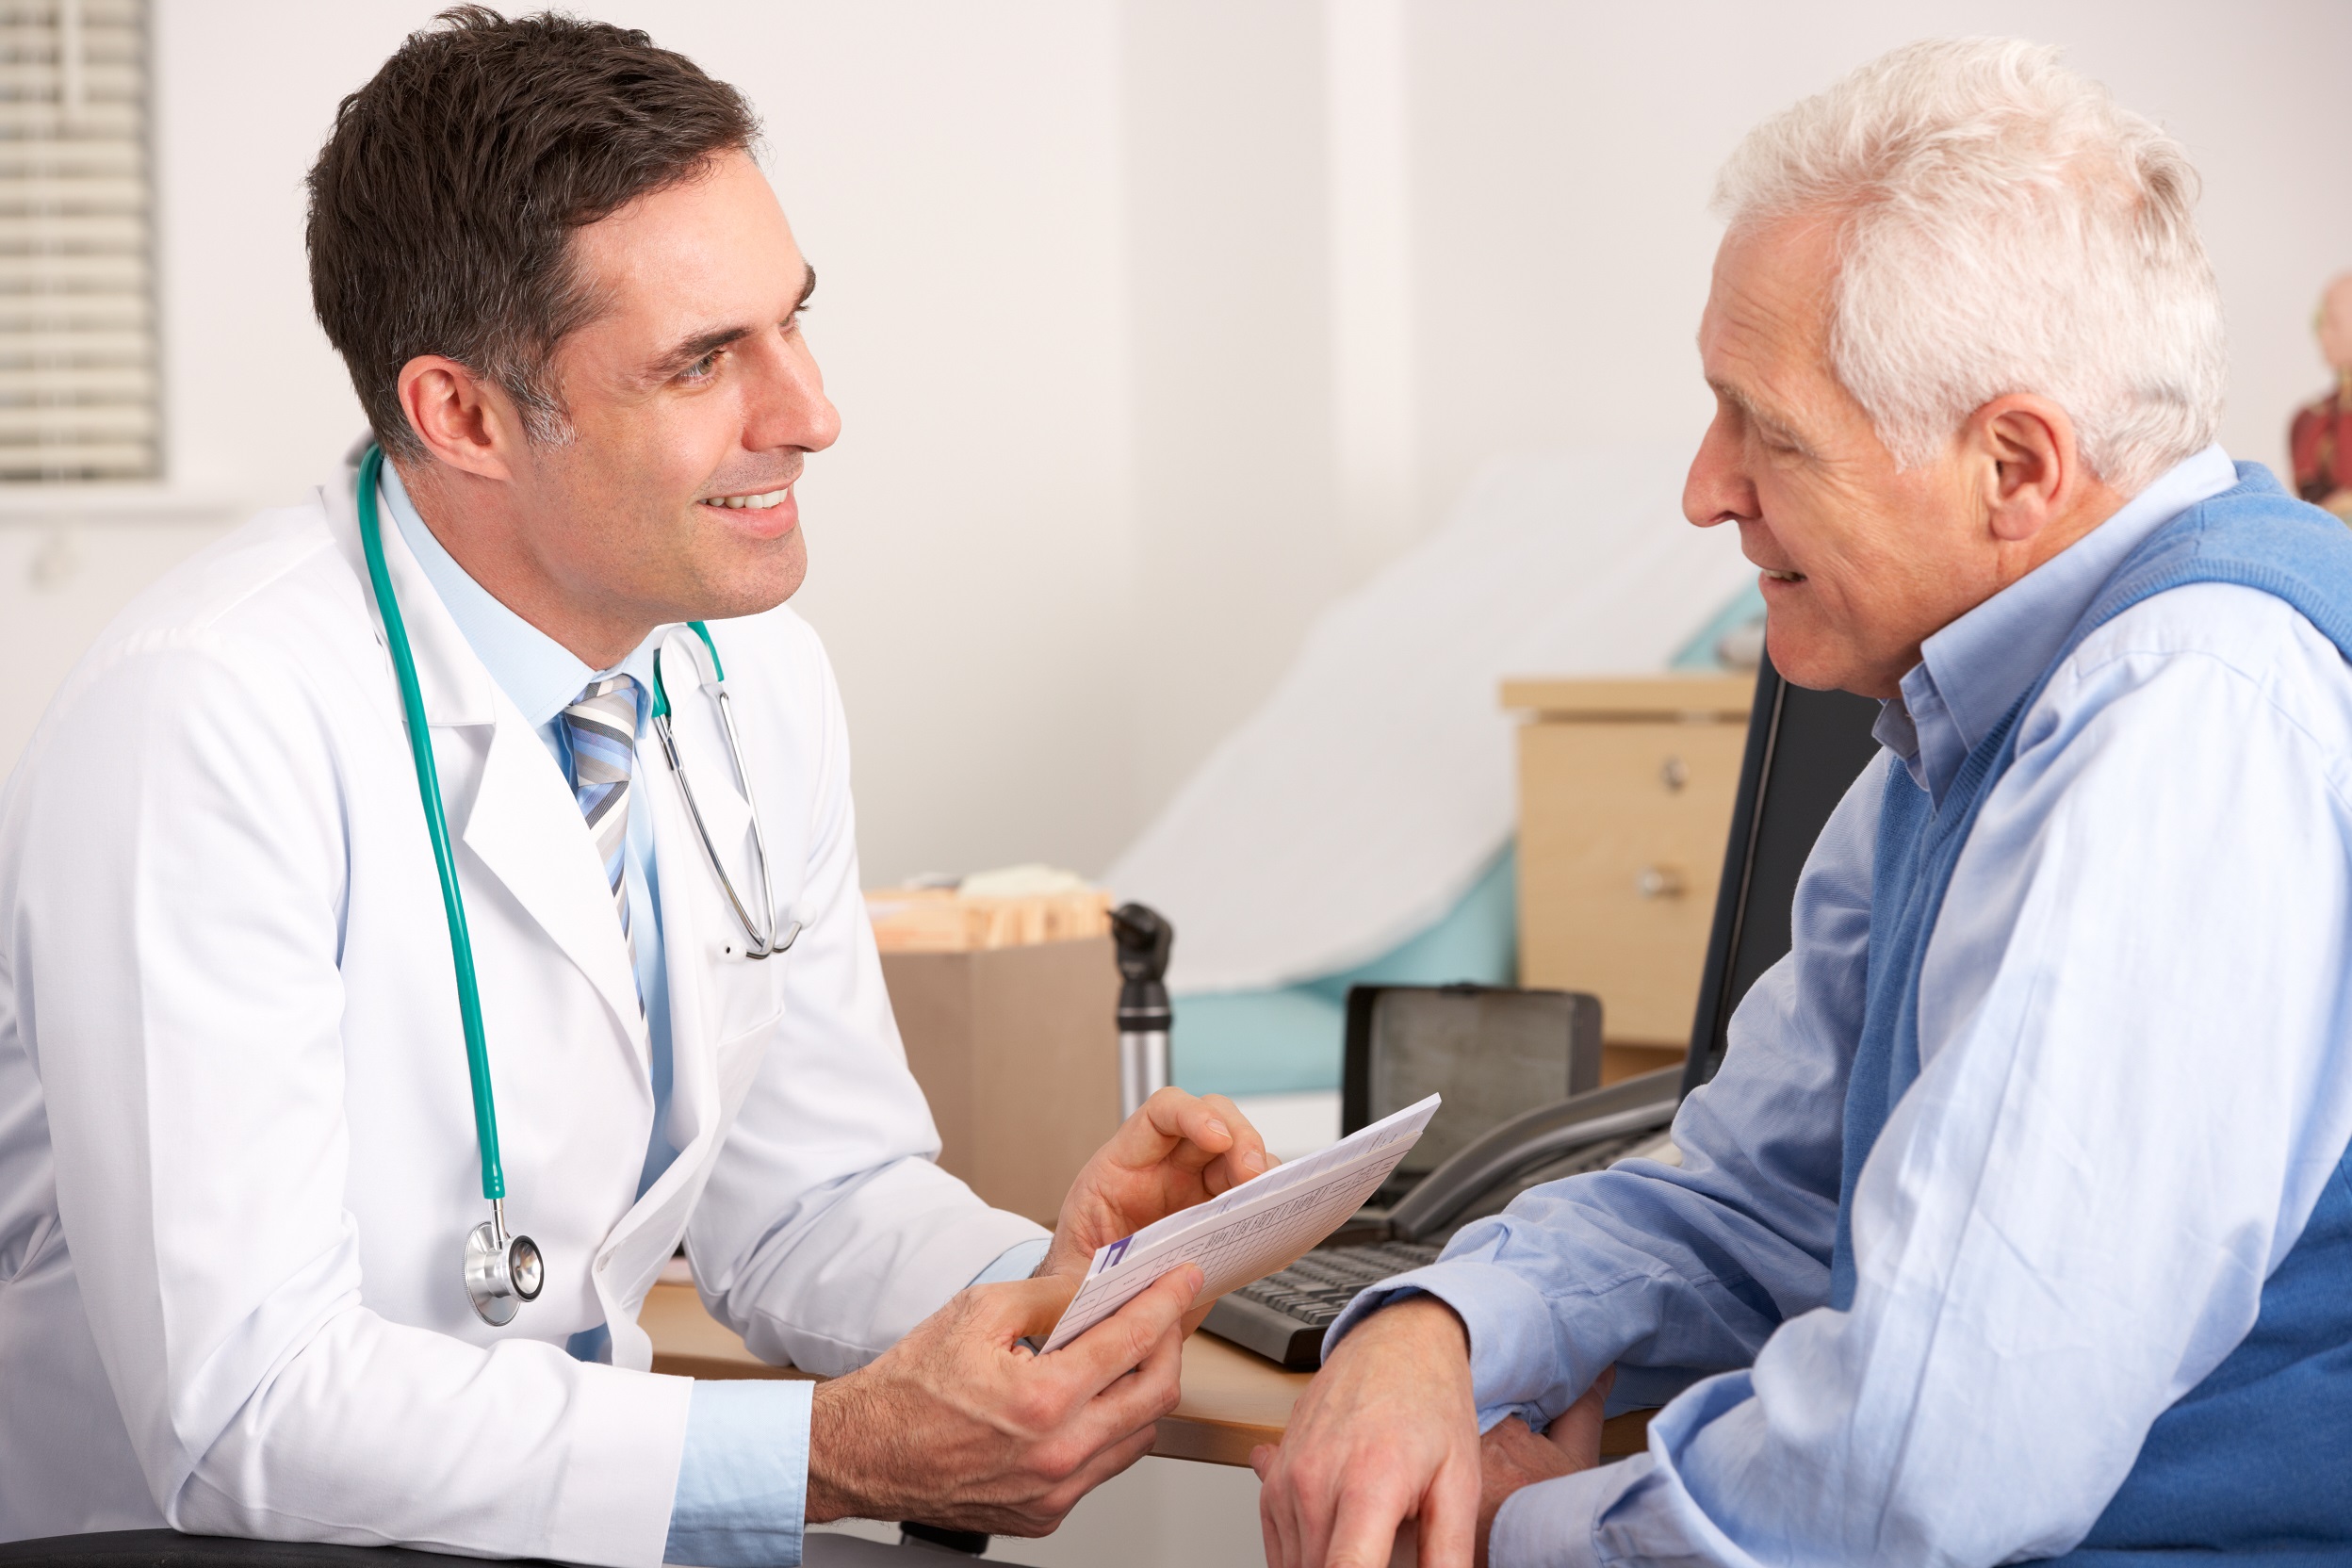 Treating Prostate Cancer: Know Your Options Beyond Surgery